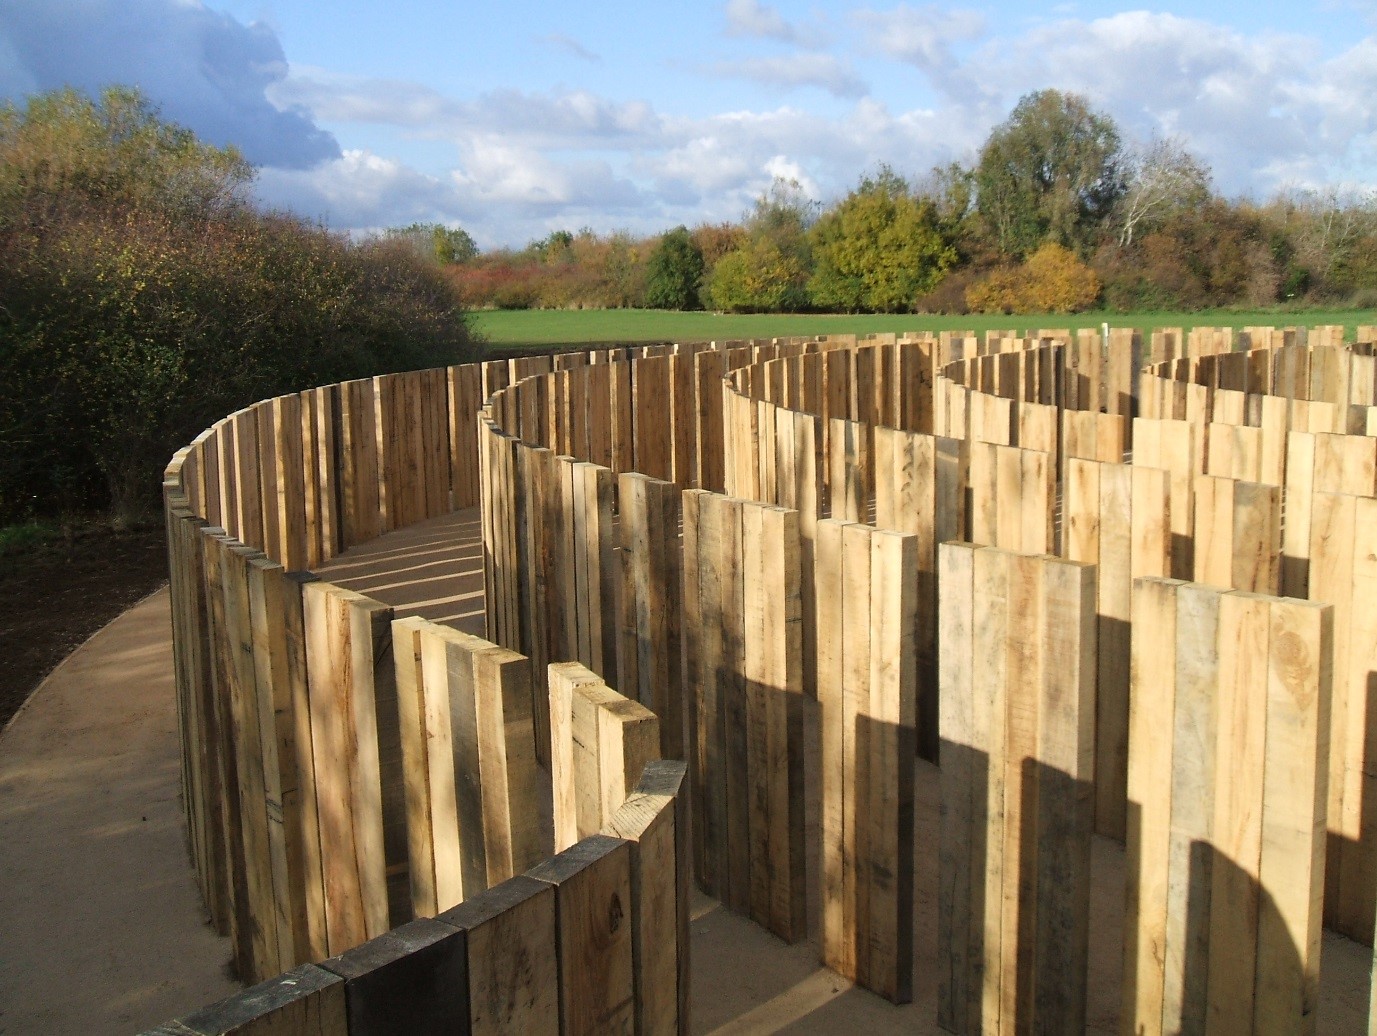 Wooden labyrinth; Priory Country Park Bedfordshire